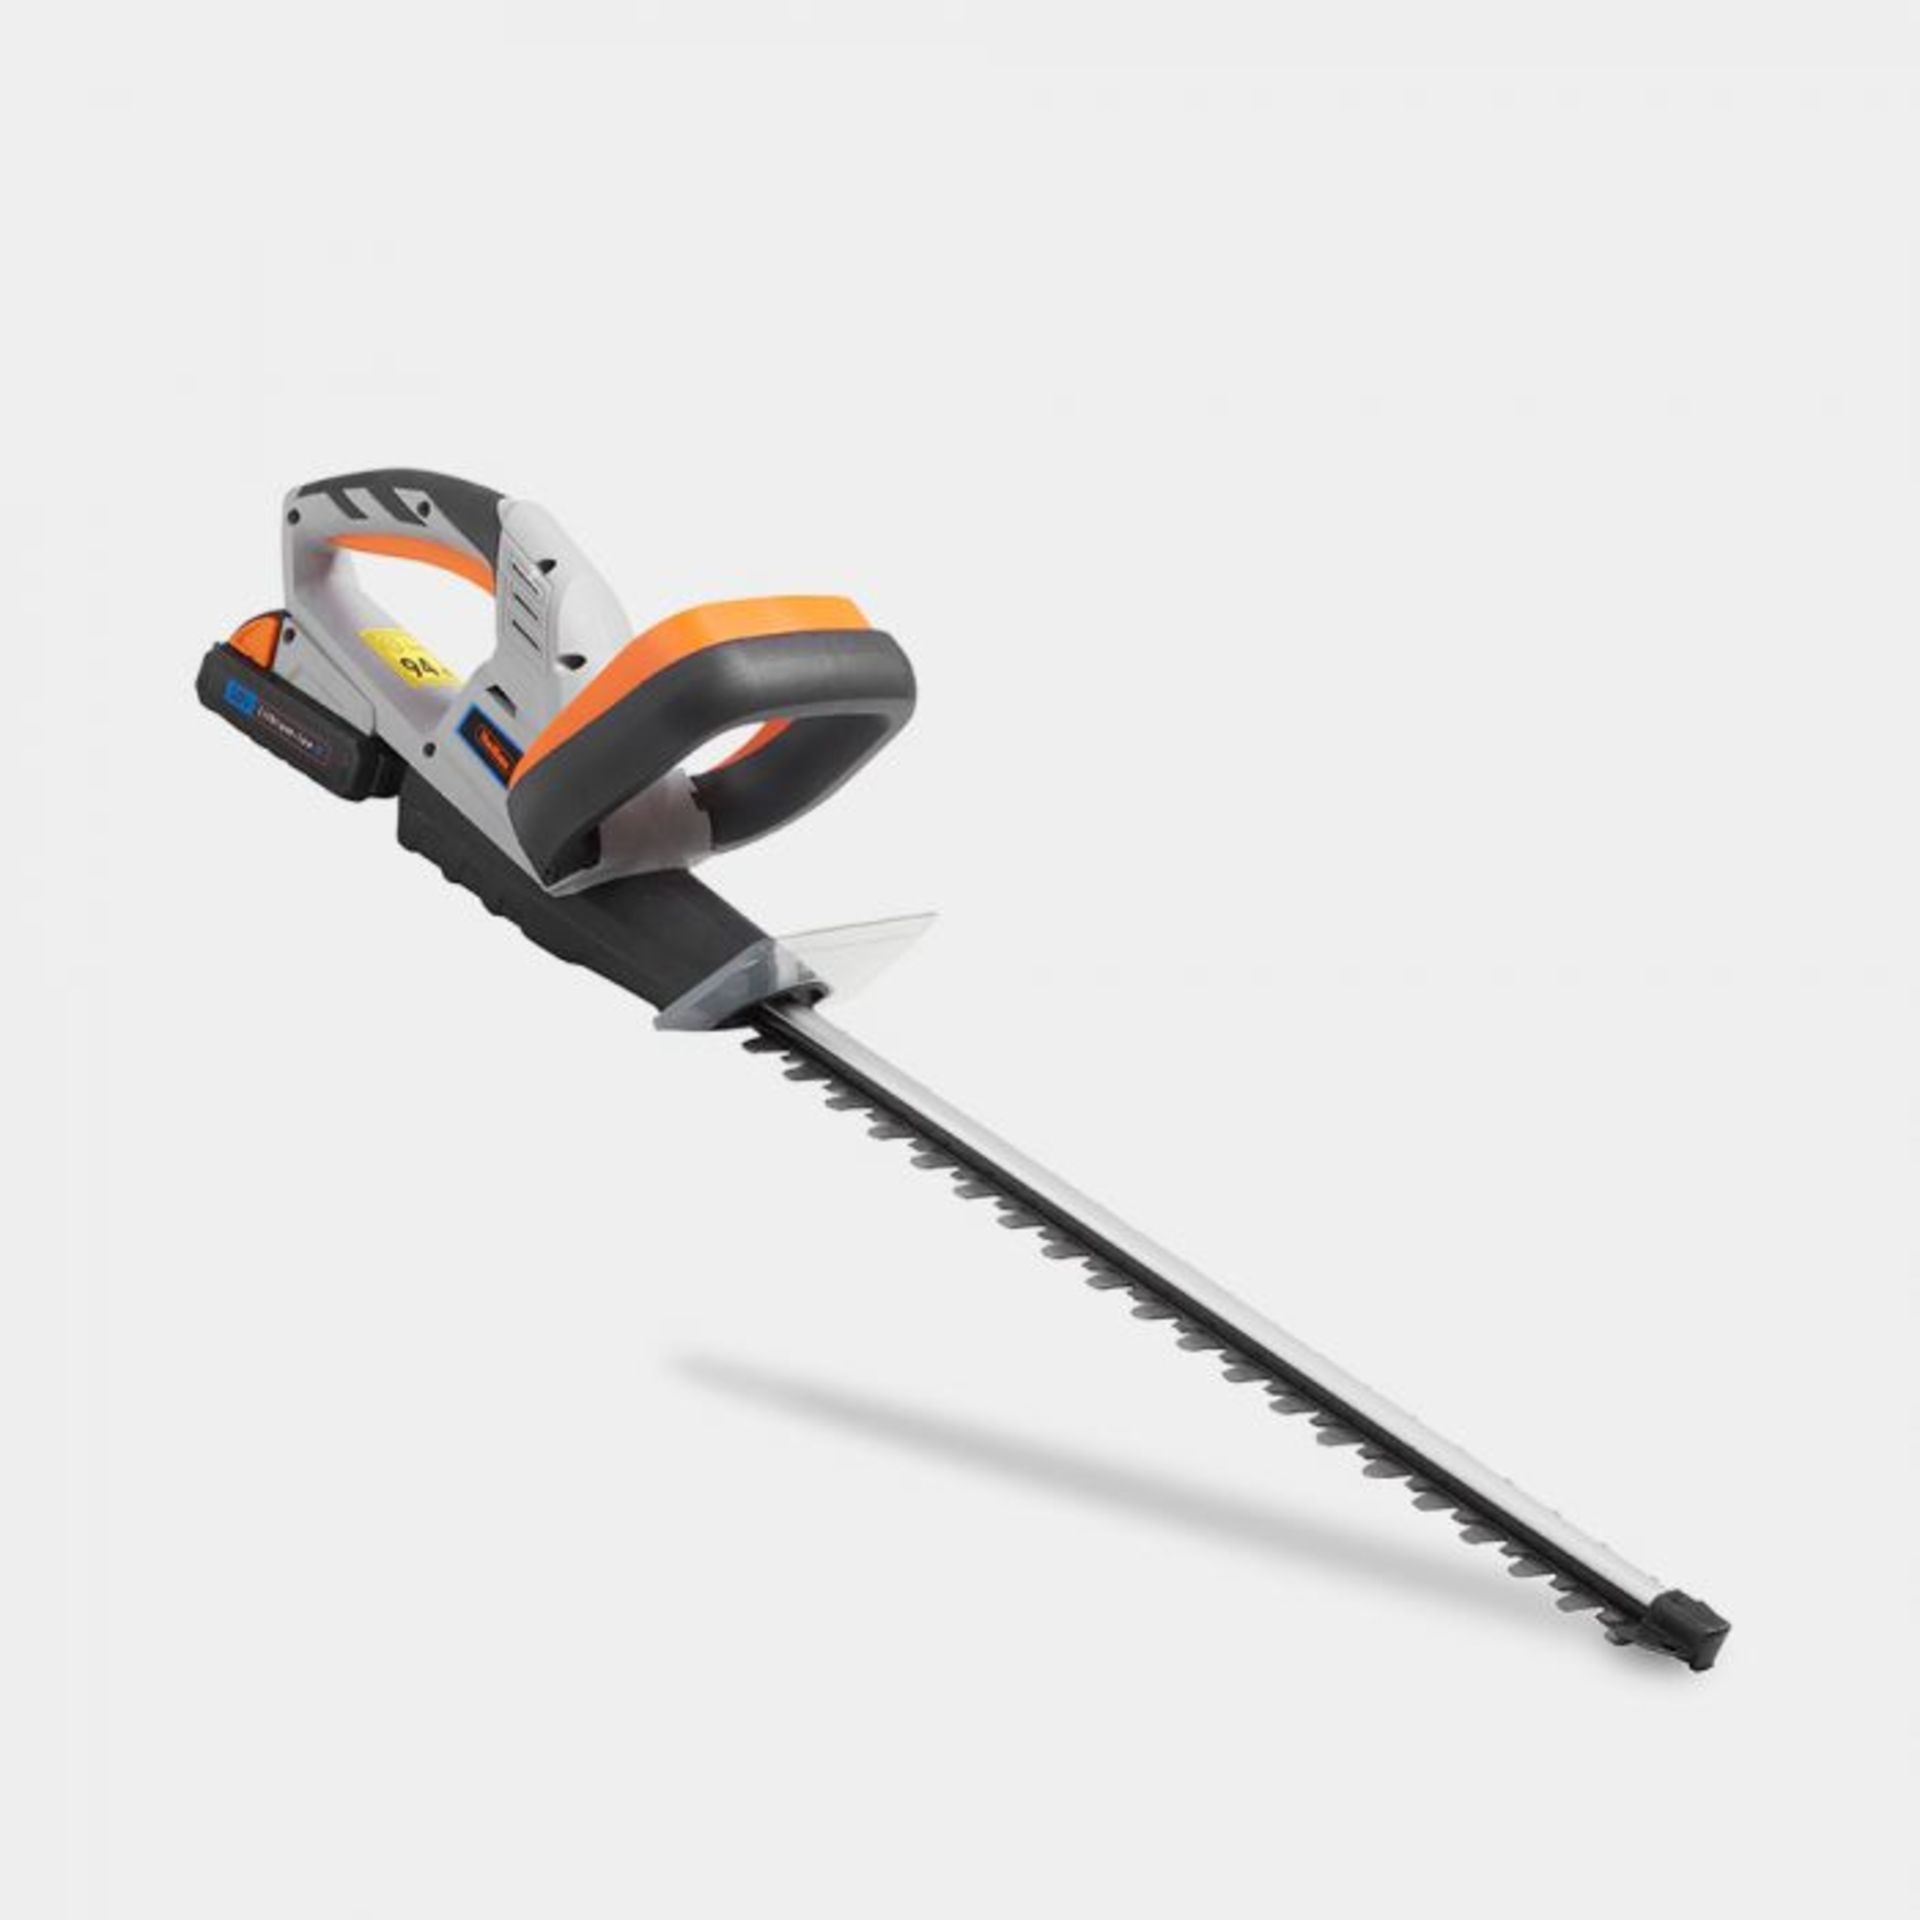 G-series Cordless Hedge Trimmer. Don’t waste your energy with manual hedge trimming. The electric